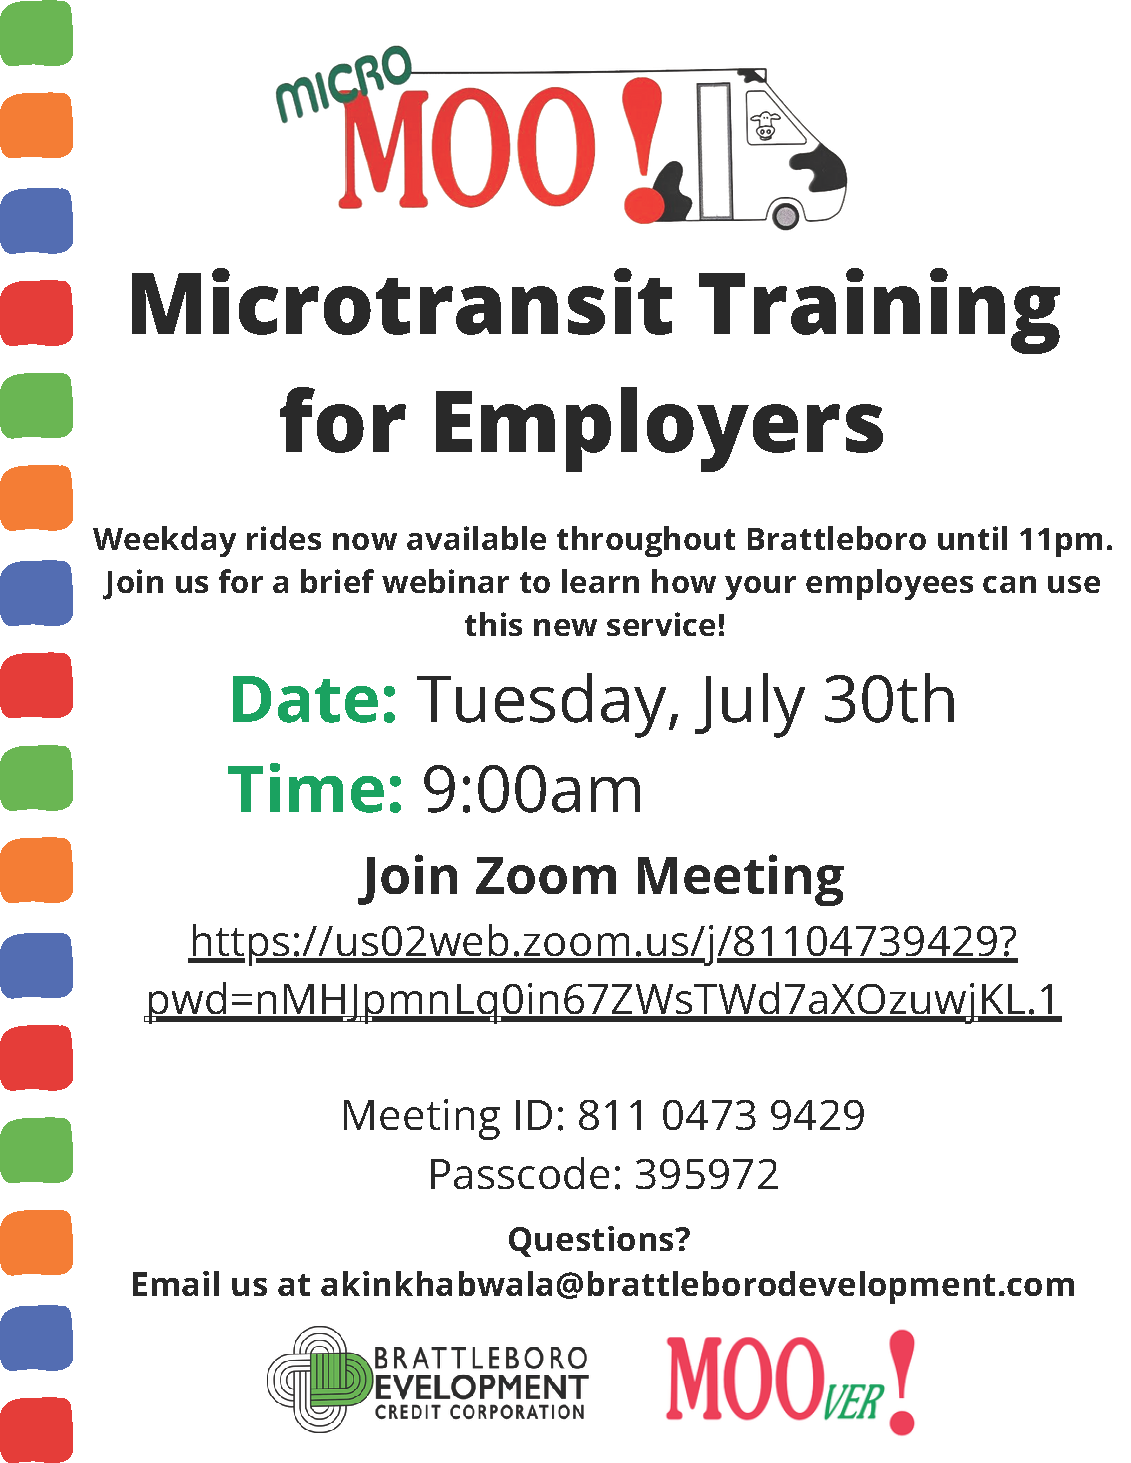 Microtransit Training For Employers (2)